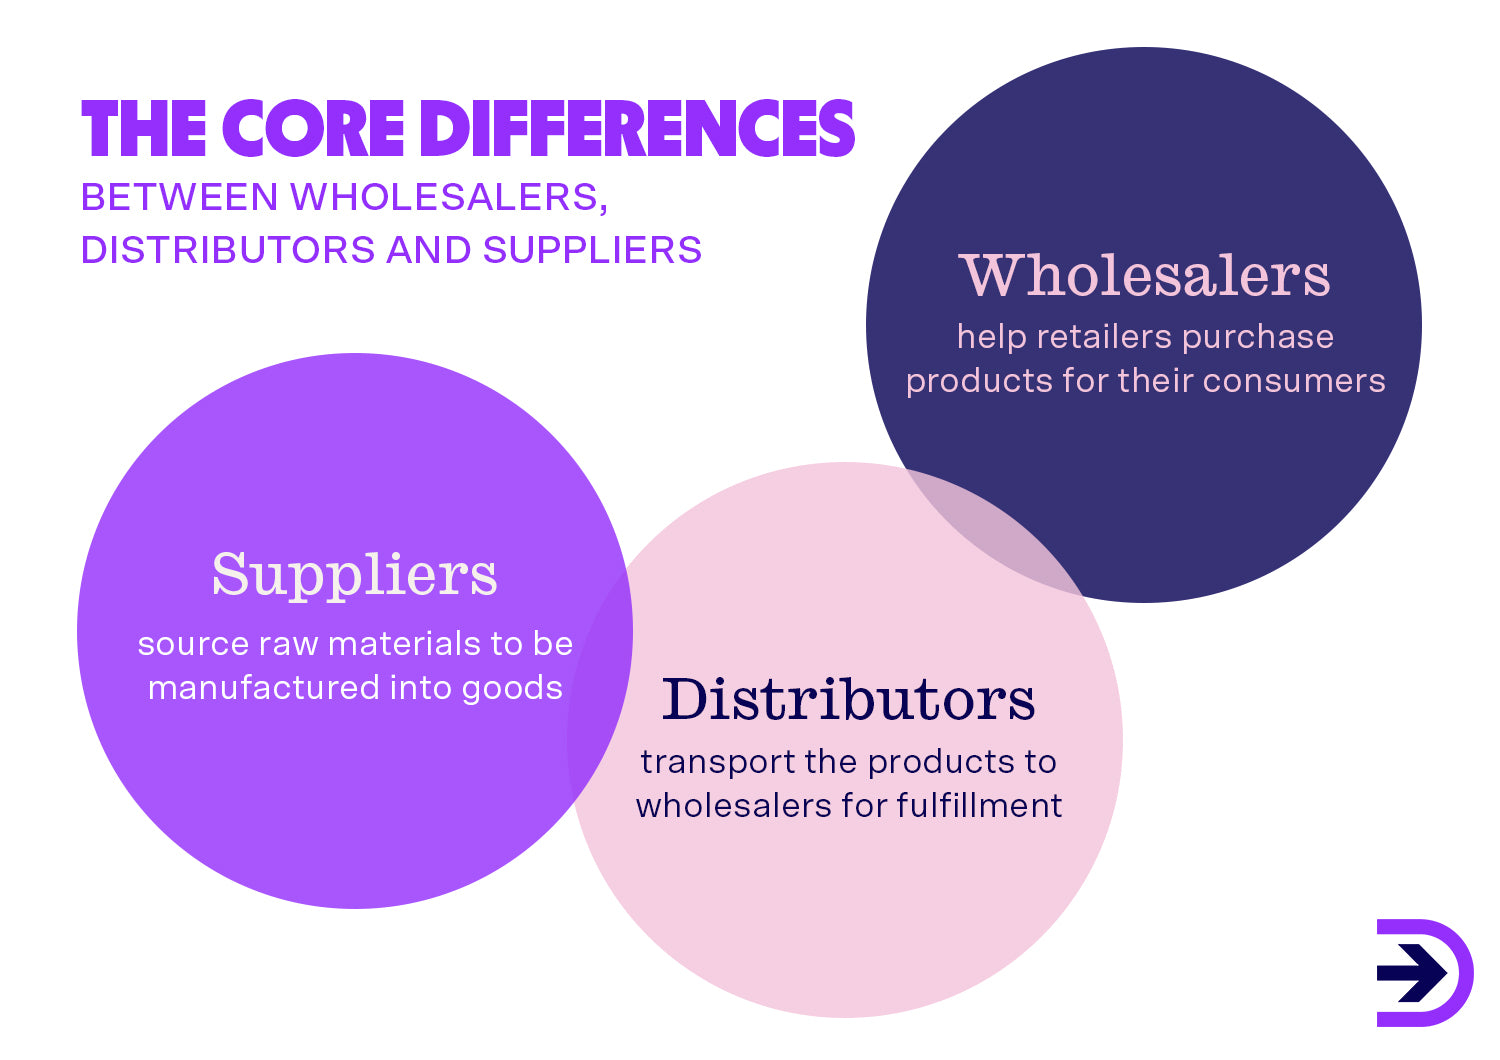 Suppliers are the beginning of a supply chain to start the production process leading to distributors getting the product to wholesalers.